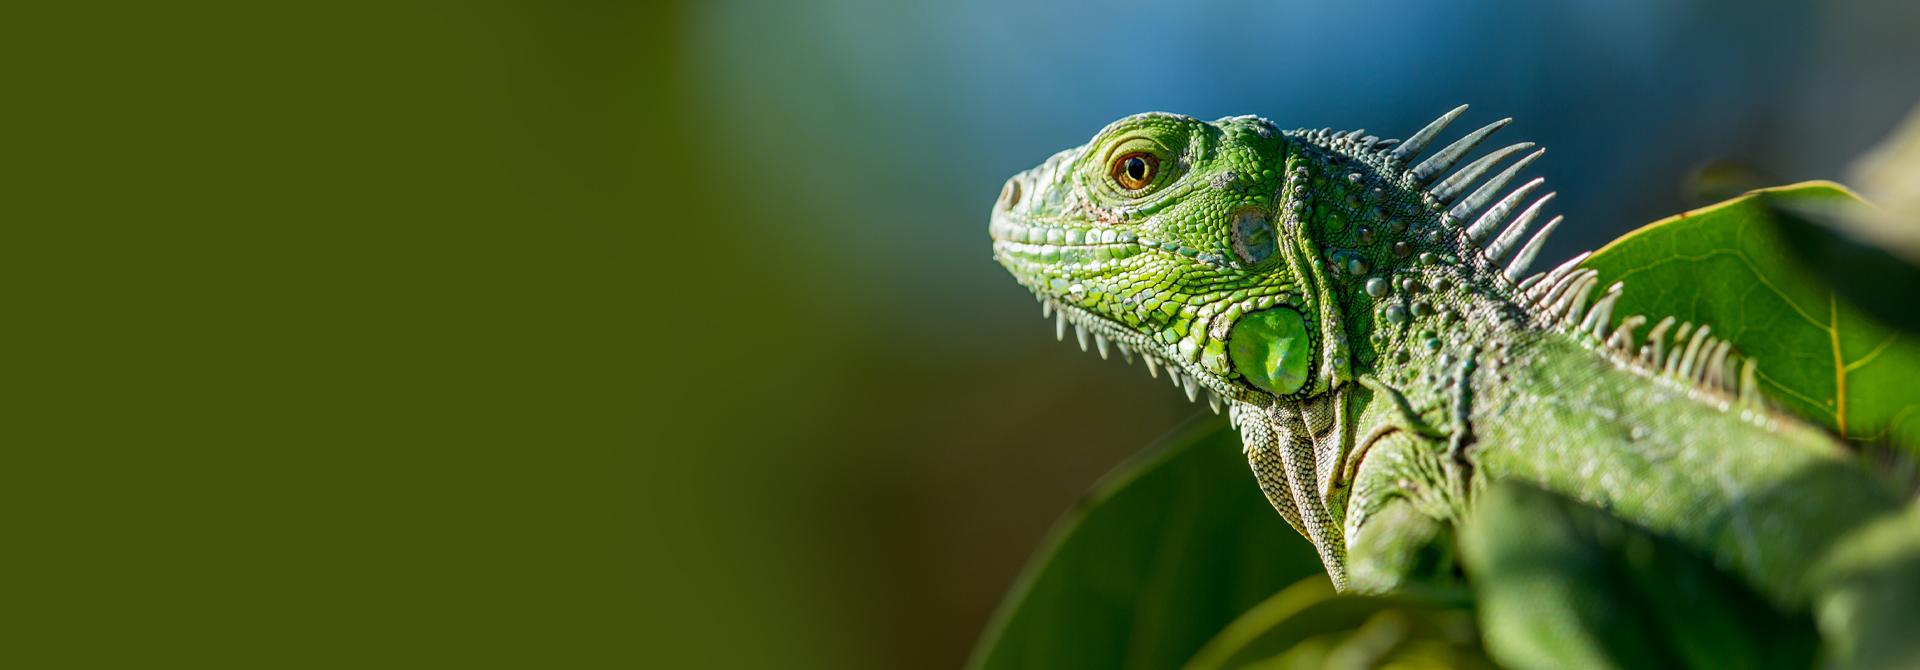 Iguanas make good pets for reptile lovers